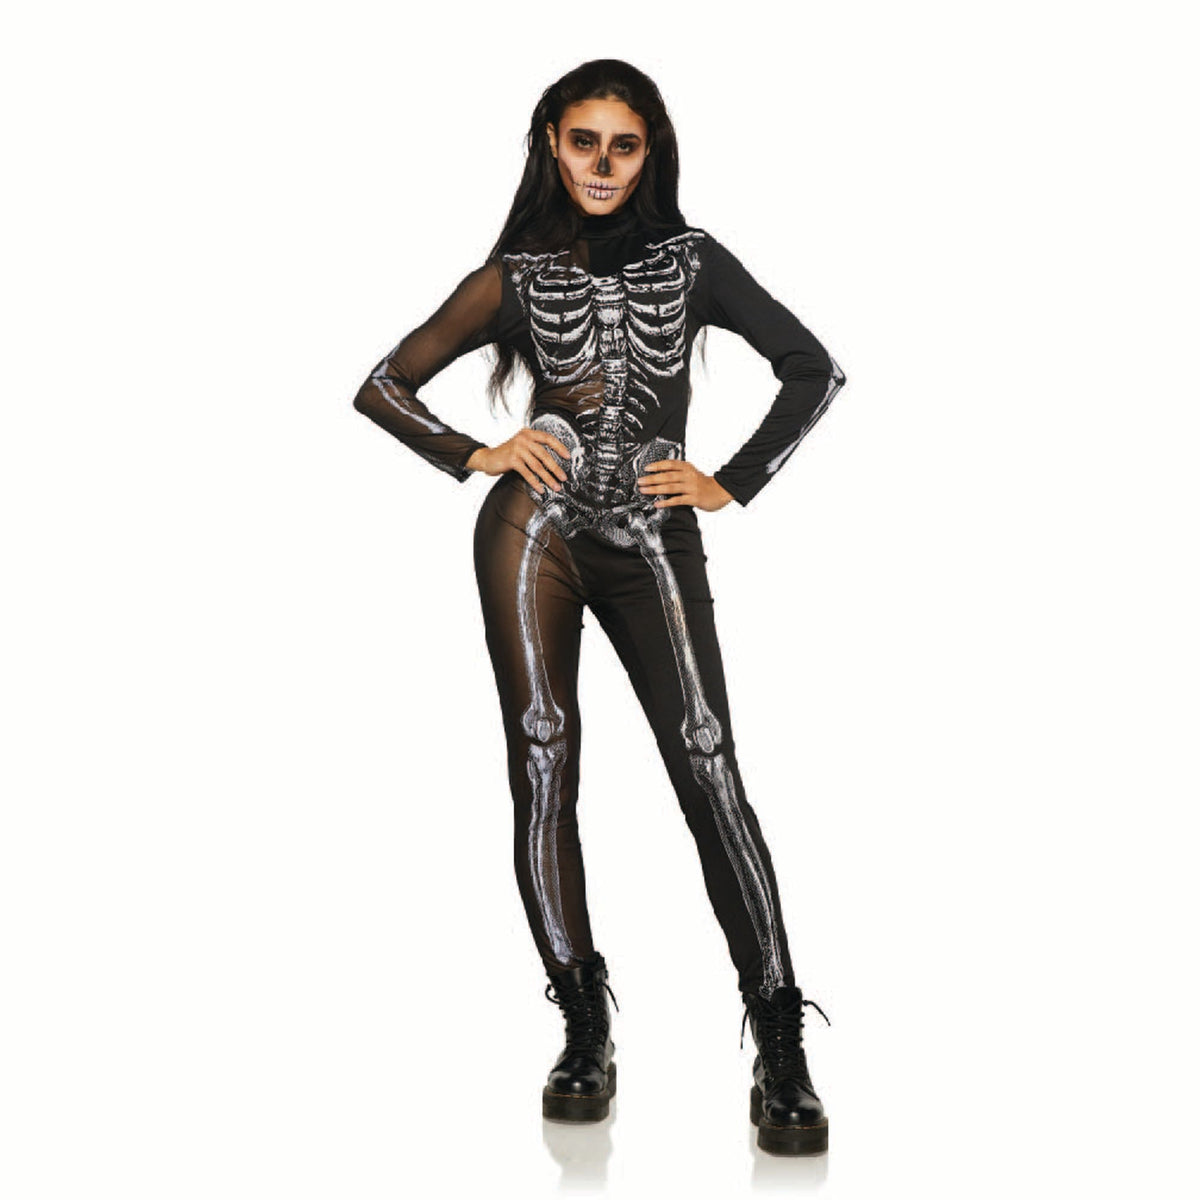 Seeing Red Inc. Costumes Skeleton Catsuit Costume for Adults, Black Bodysuit